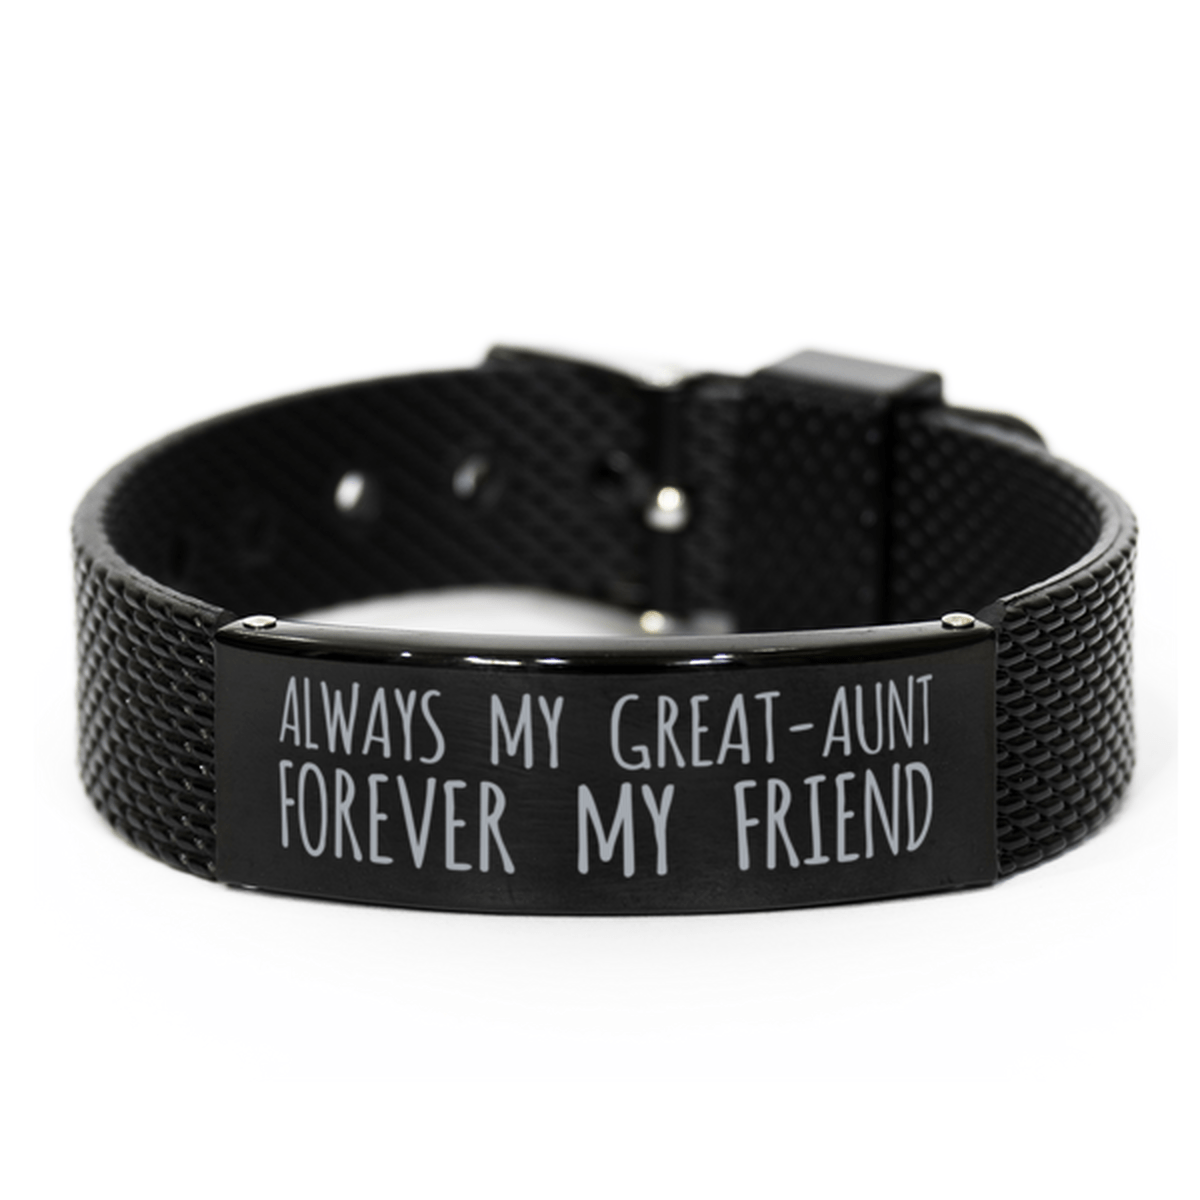 Inspirational Great Aunt Black Shark Mesh Bracelet, Always My Great Aunt Forever My Friend, Best Birthday Gifts for Family Friends